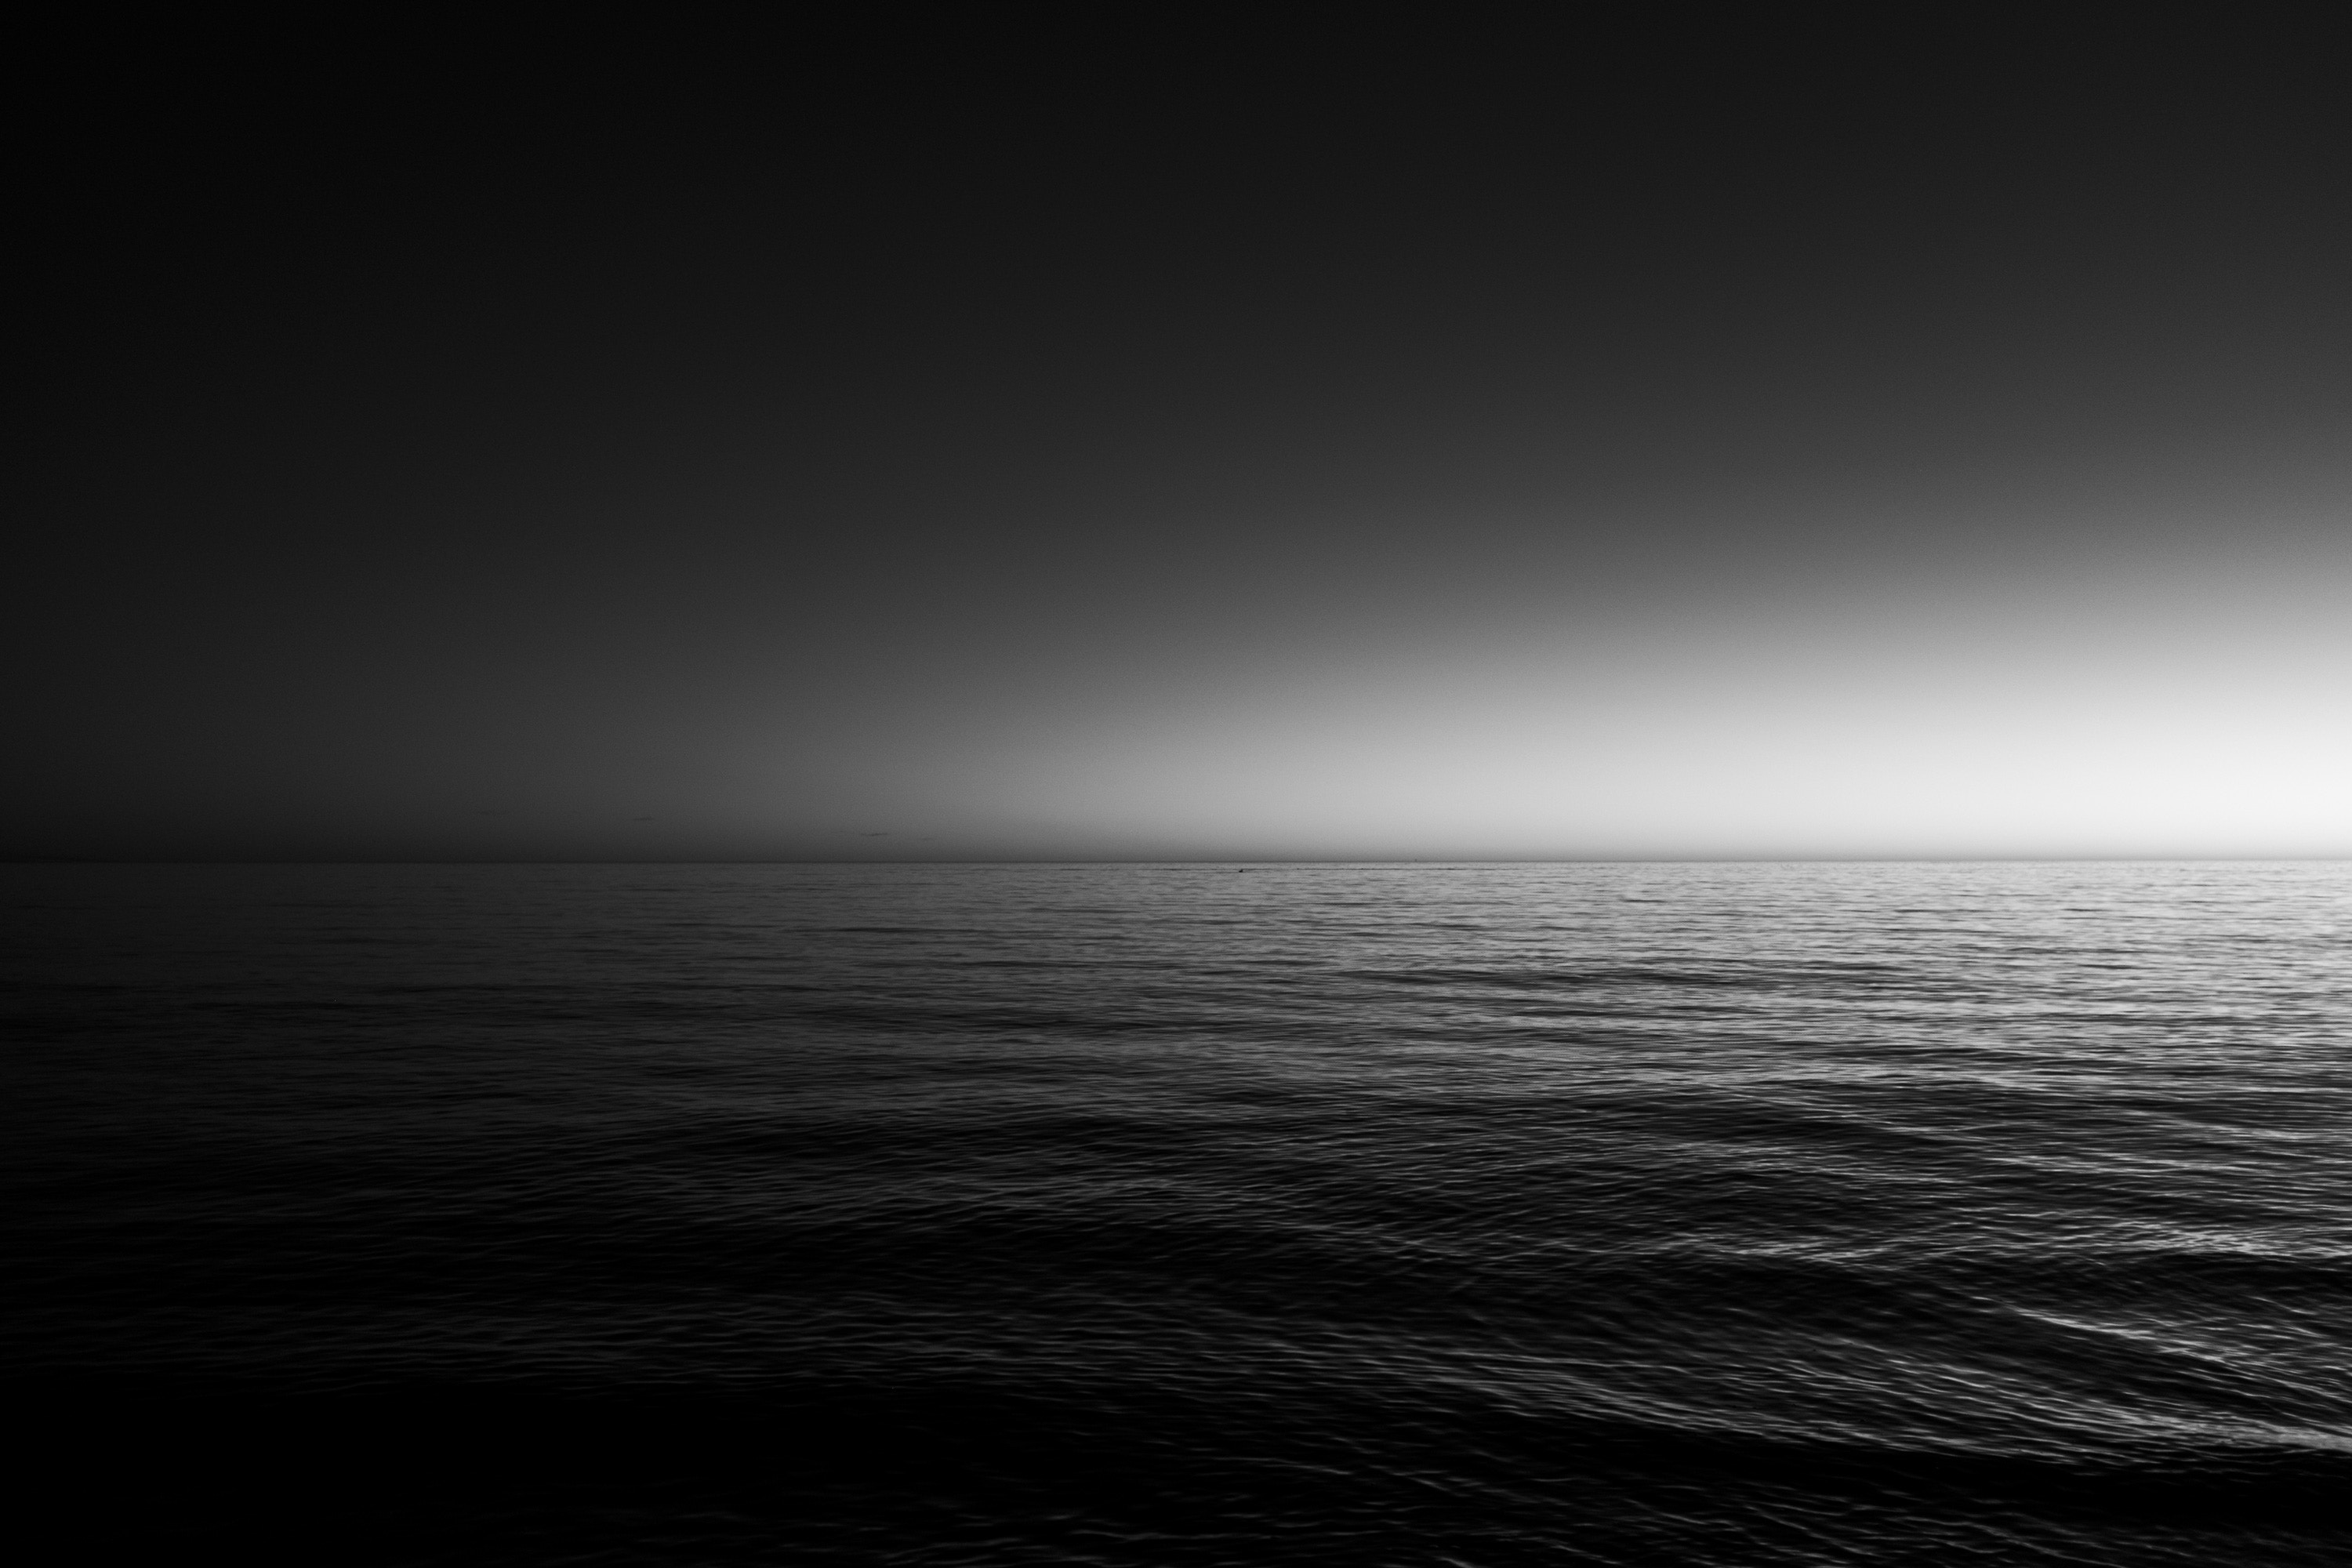 3000x2000 #ocean, #gloom, #nature, #open water, #solitude, #fog, # scary, #sky, #frightening, #coast, #black and white, #mist, #minimal, #outdoors, #evening, #water, #calm, #night, #sea, #lonely, #PNG image HD Wallpaper